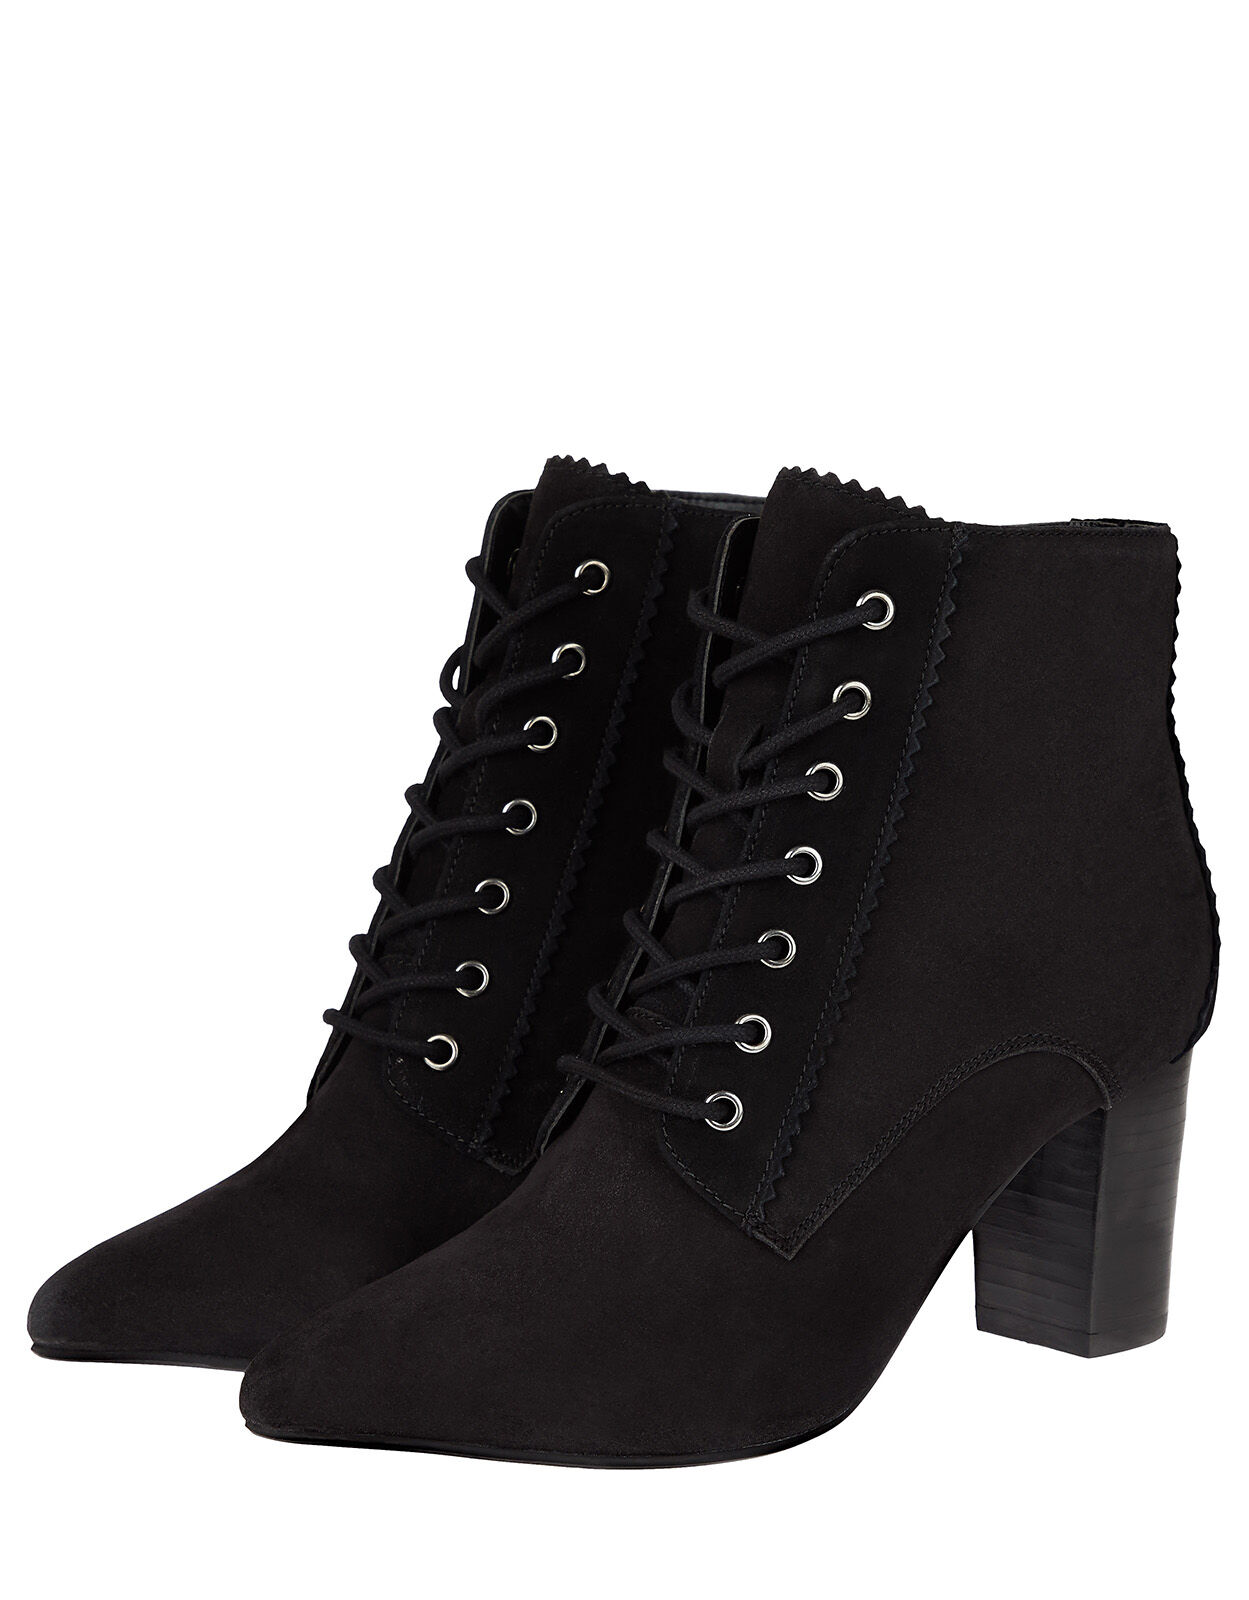 black boots lace up heels